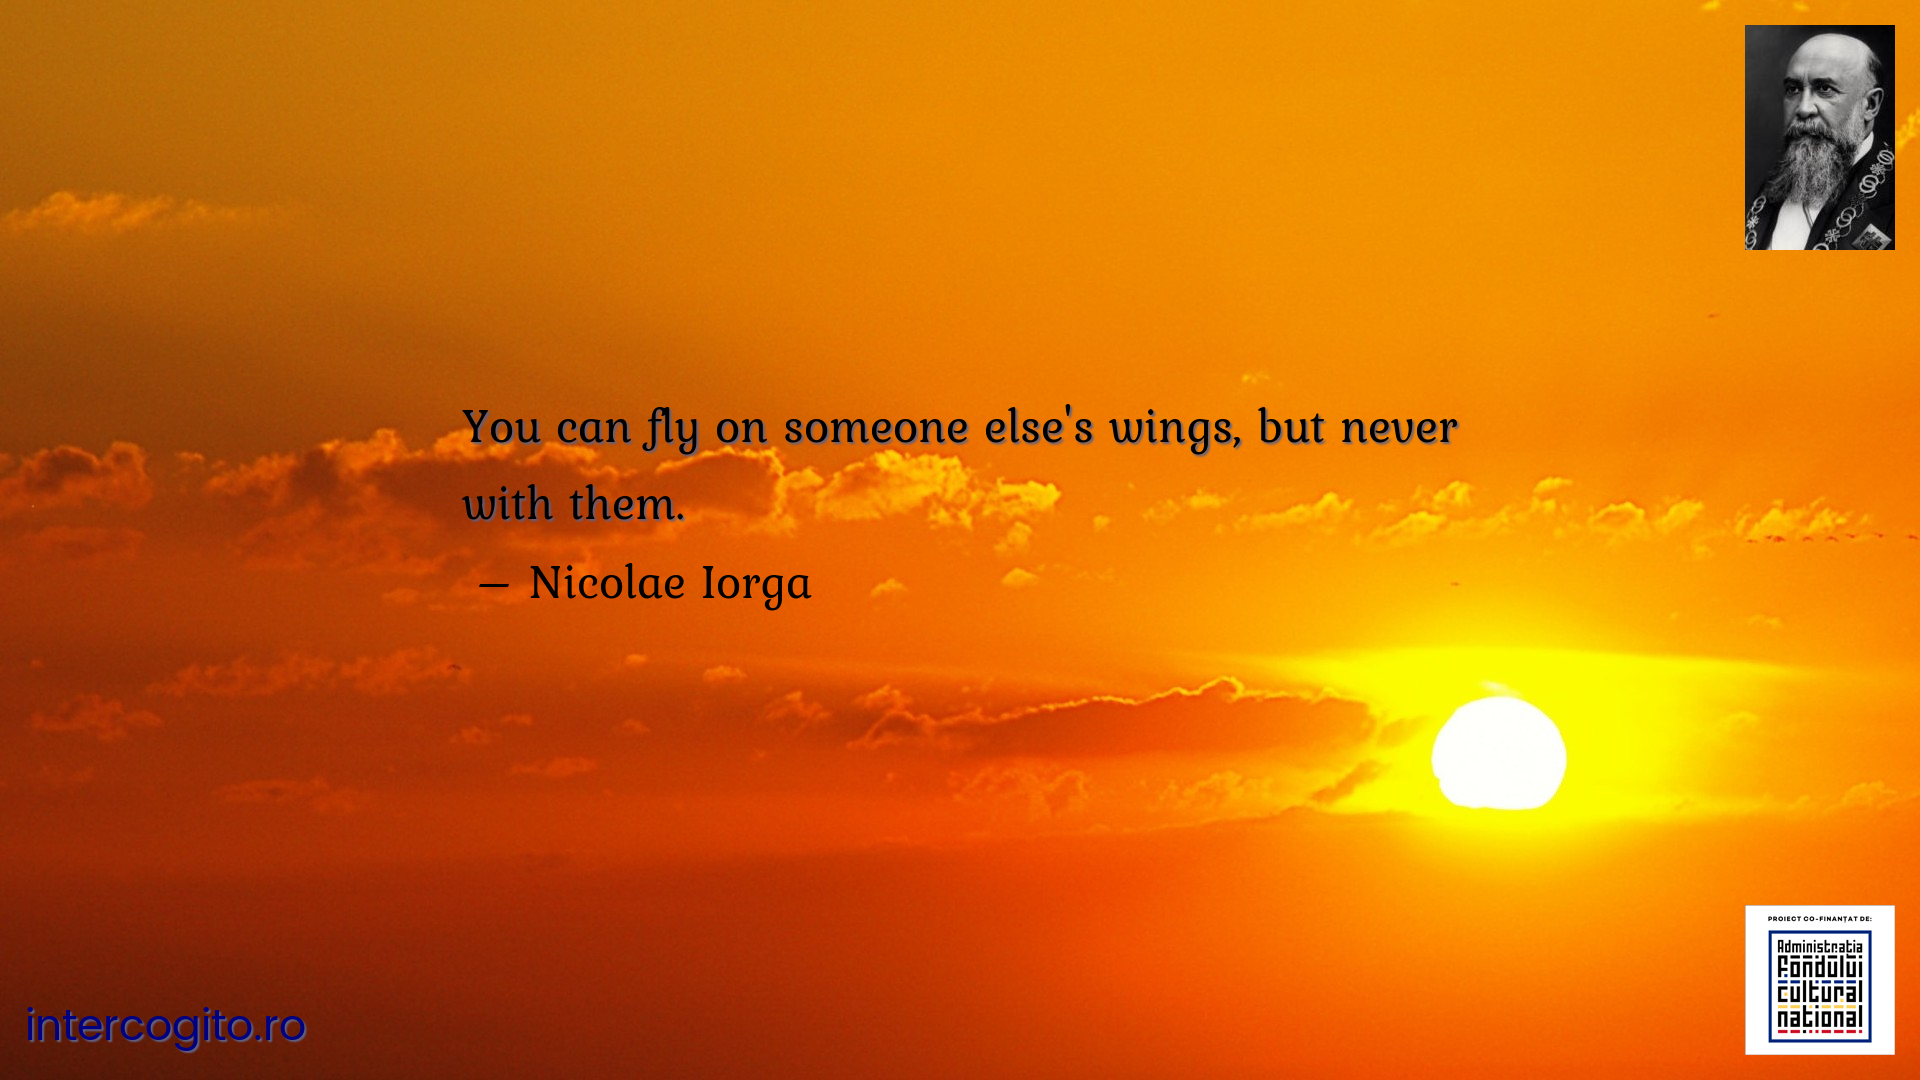 You can fly on someone else's wings, but never with them.